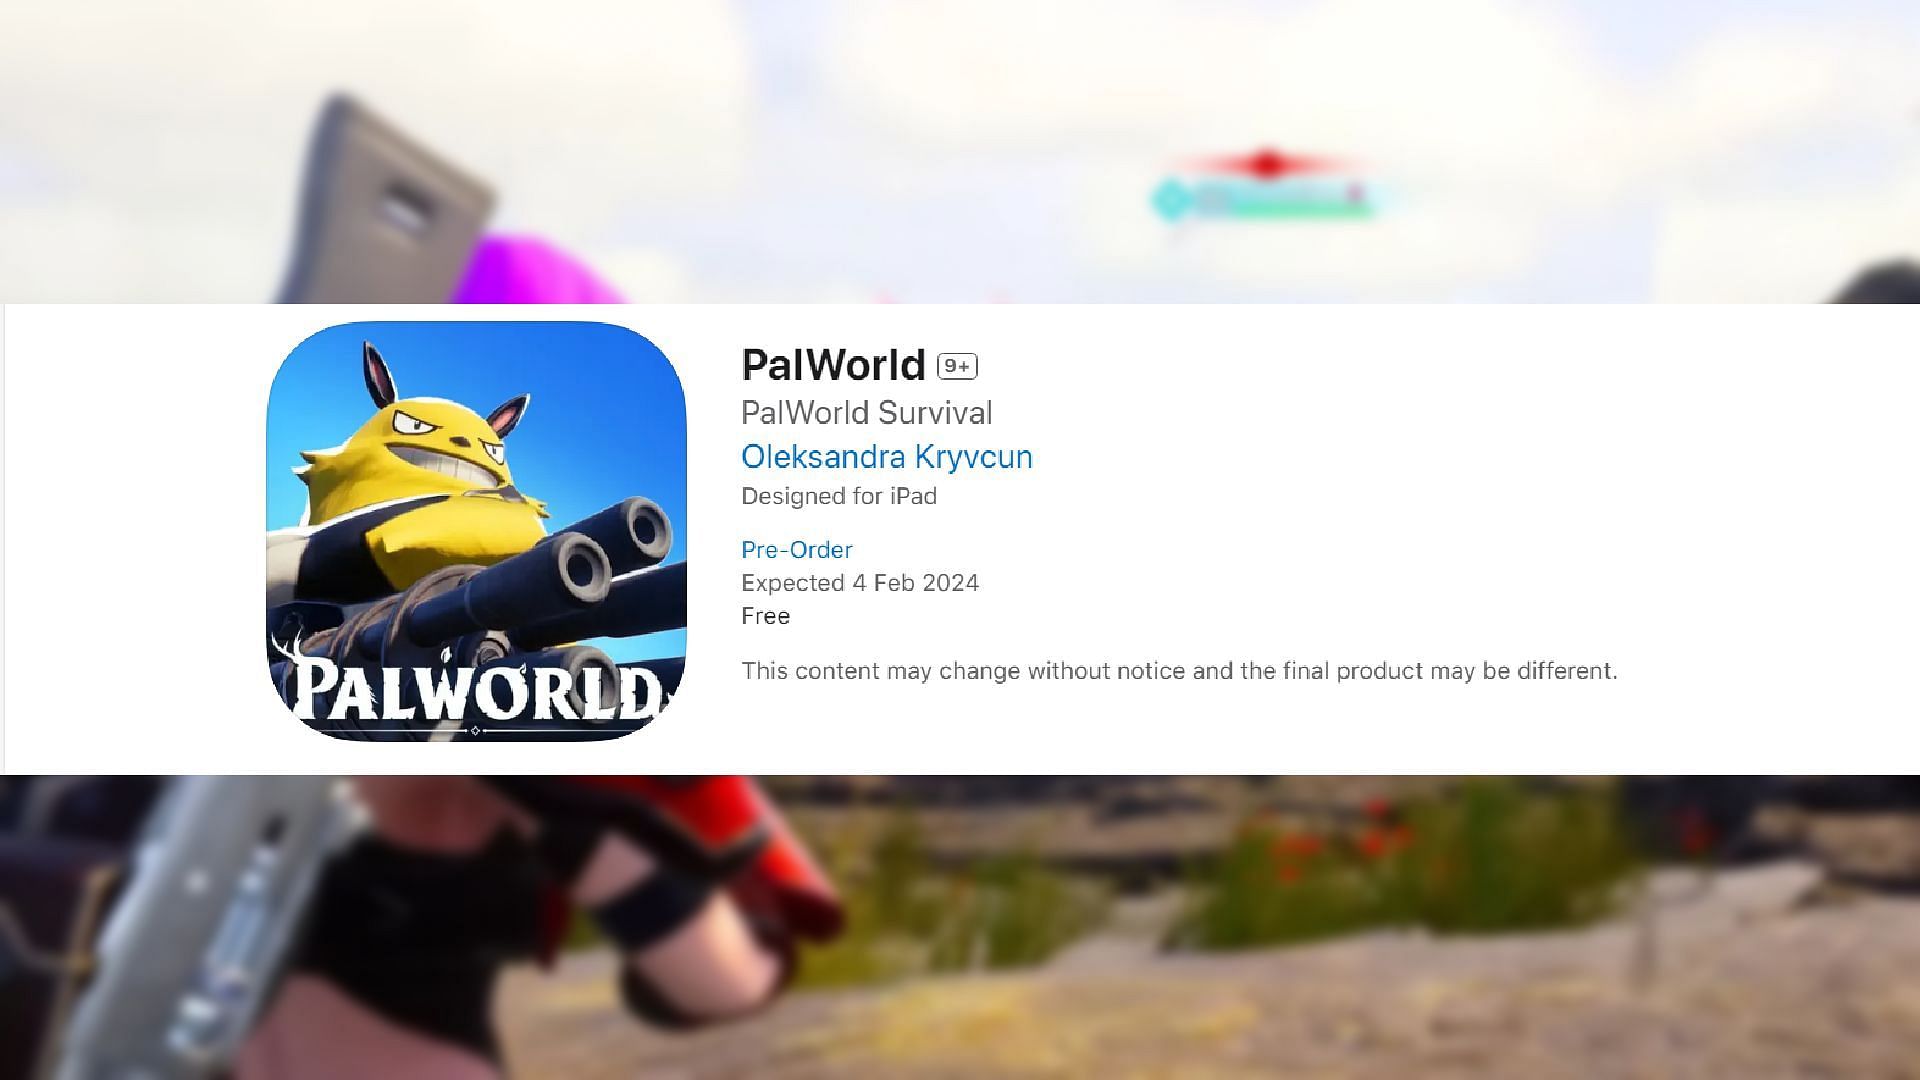 PalWorld App Store listing: Should you download?